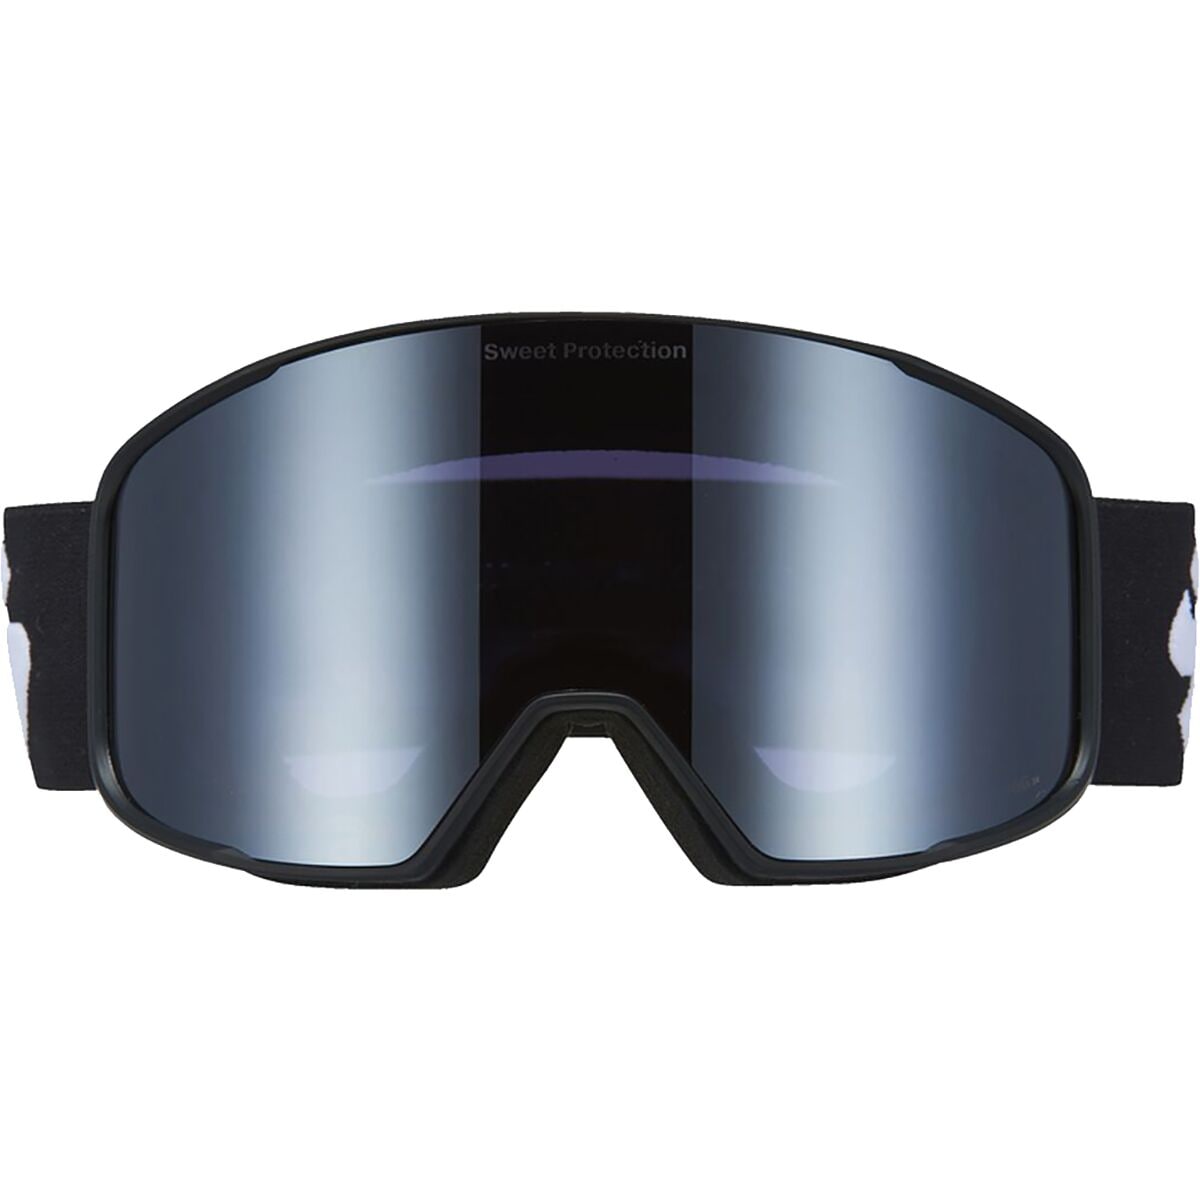  Sweet Protection Boondock RIG Reflect Goggles